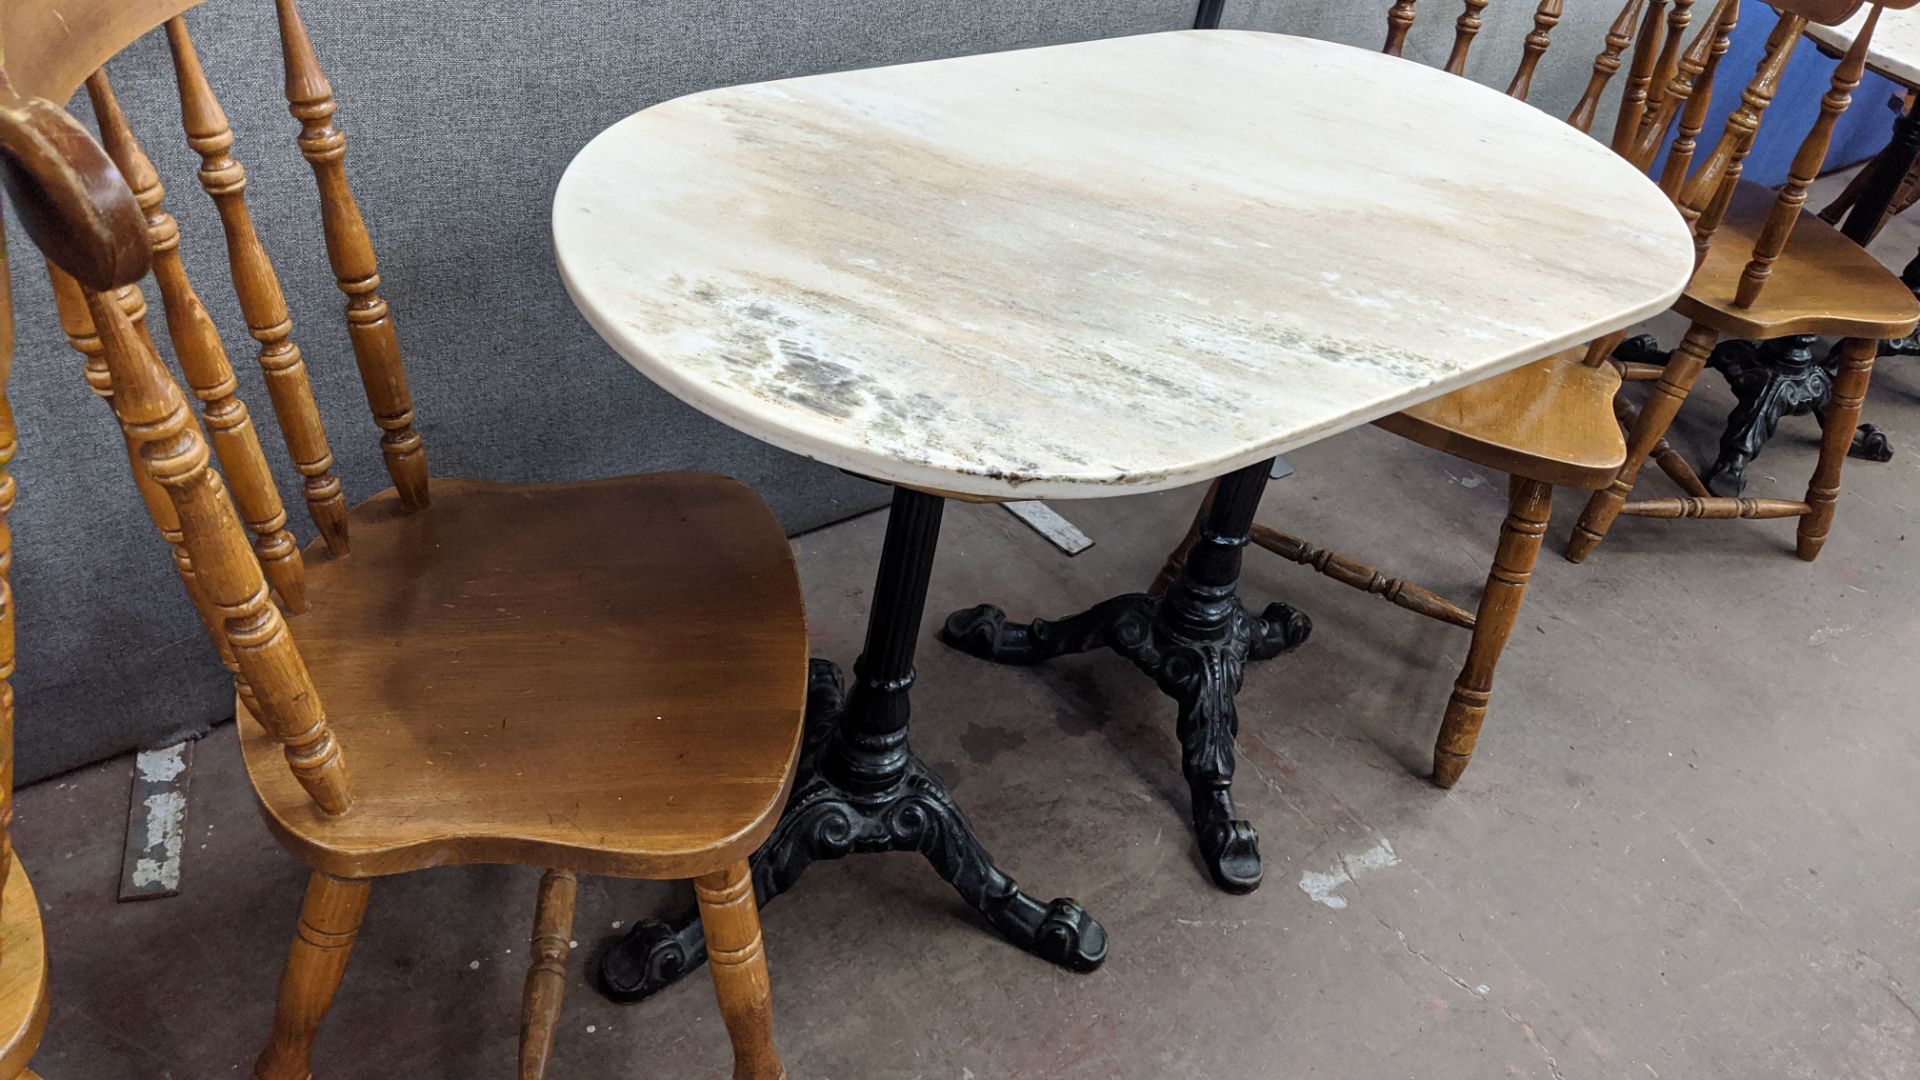 4 off oval dining/café tables, each comprising a heavy-duty marble or equivalent top & 2 off heavy-d - Image 5 of 6